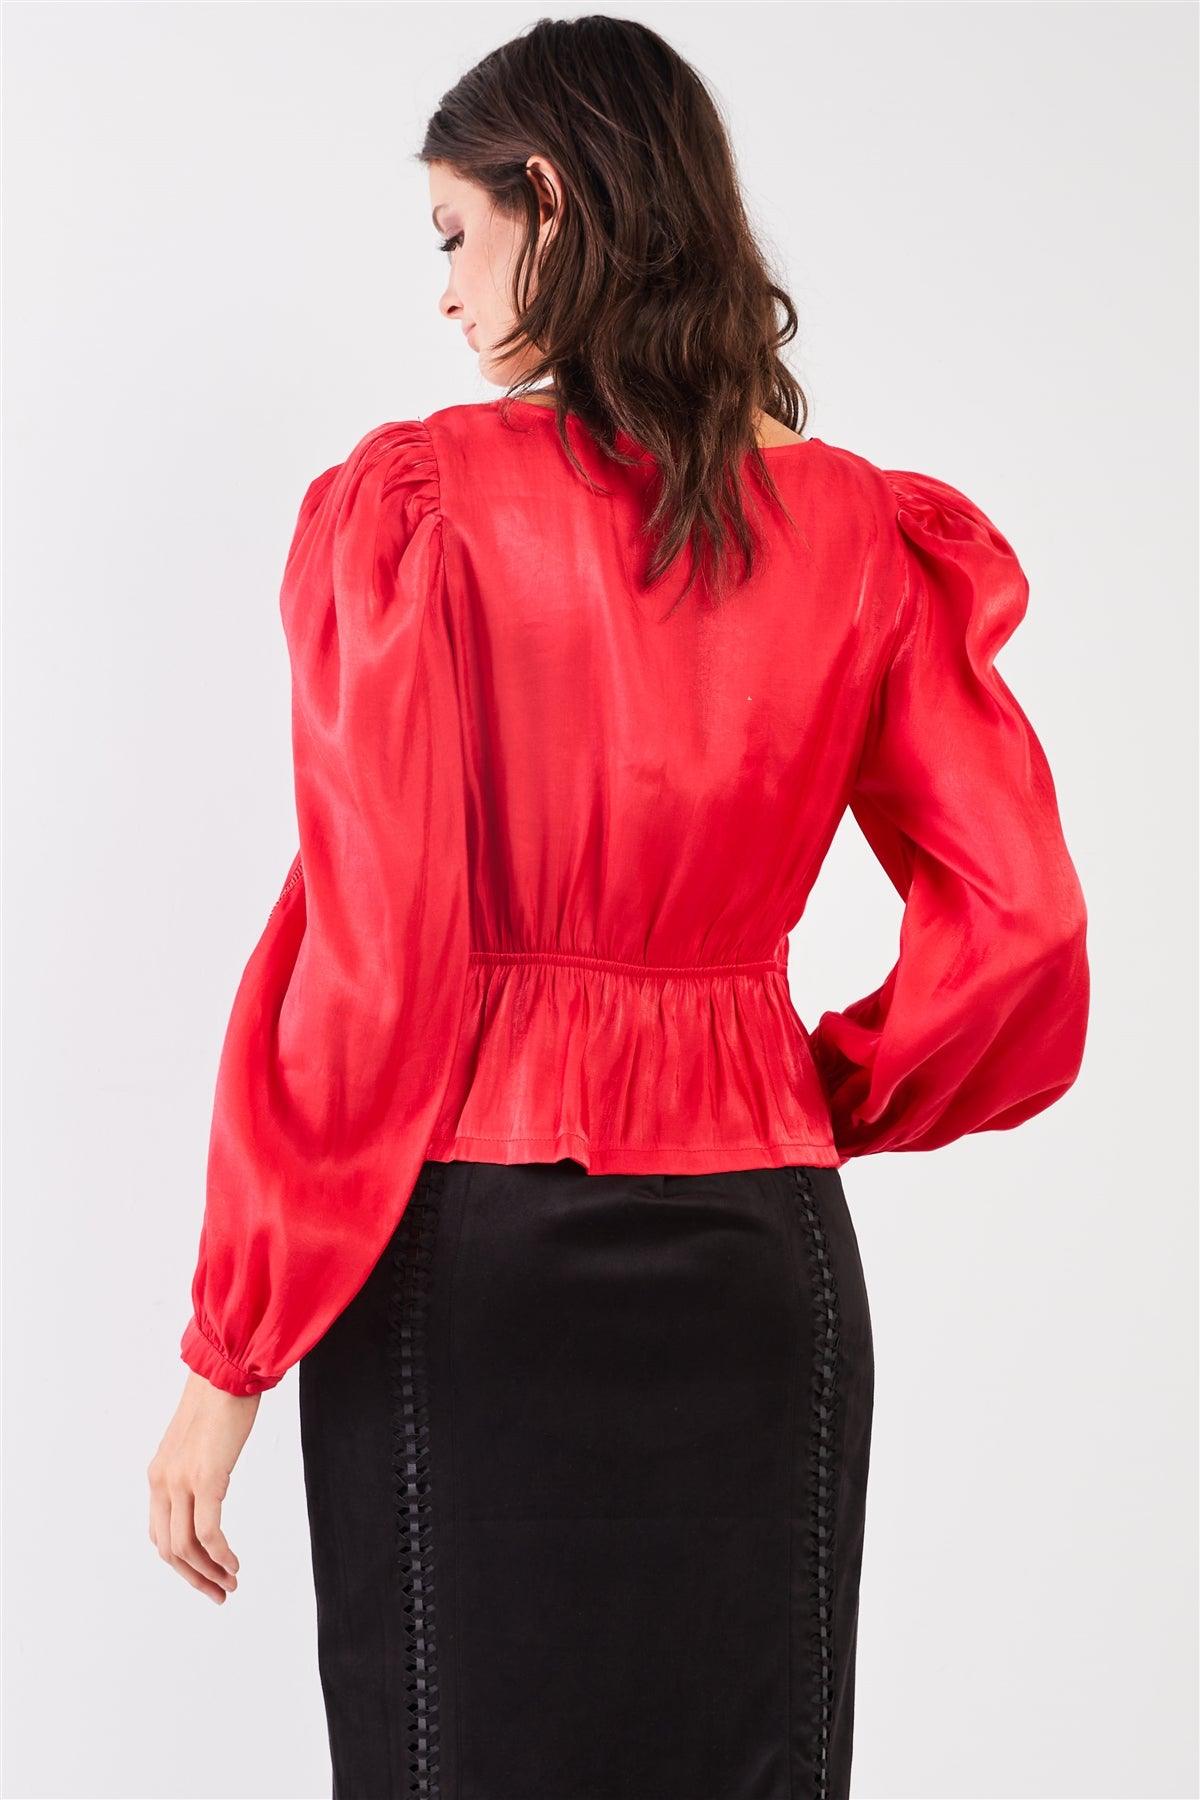 Red Glossy Chiffon Square Neck Long Bishop Sleeve Mock Button Down Top